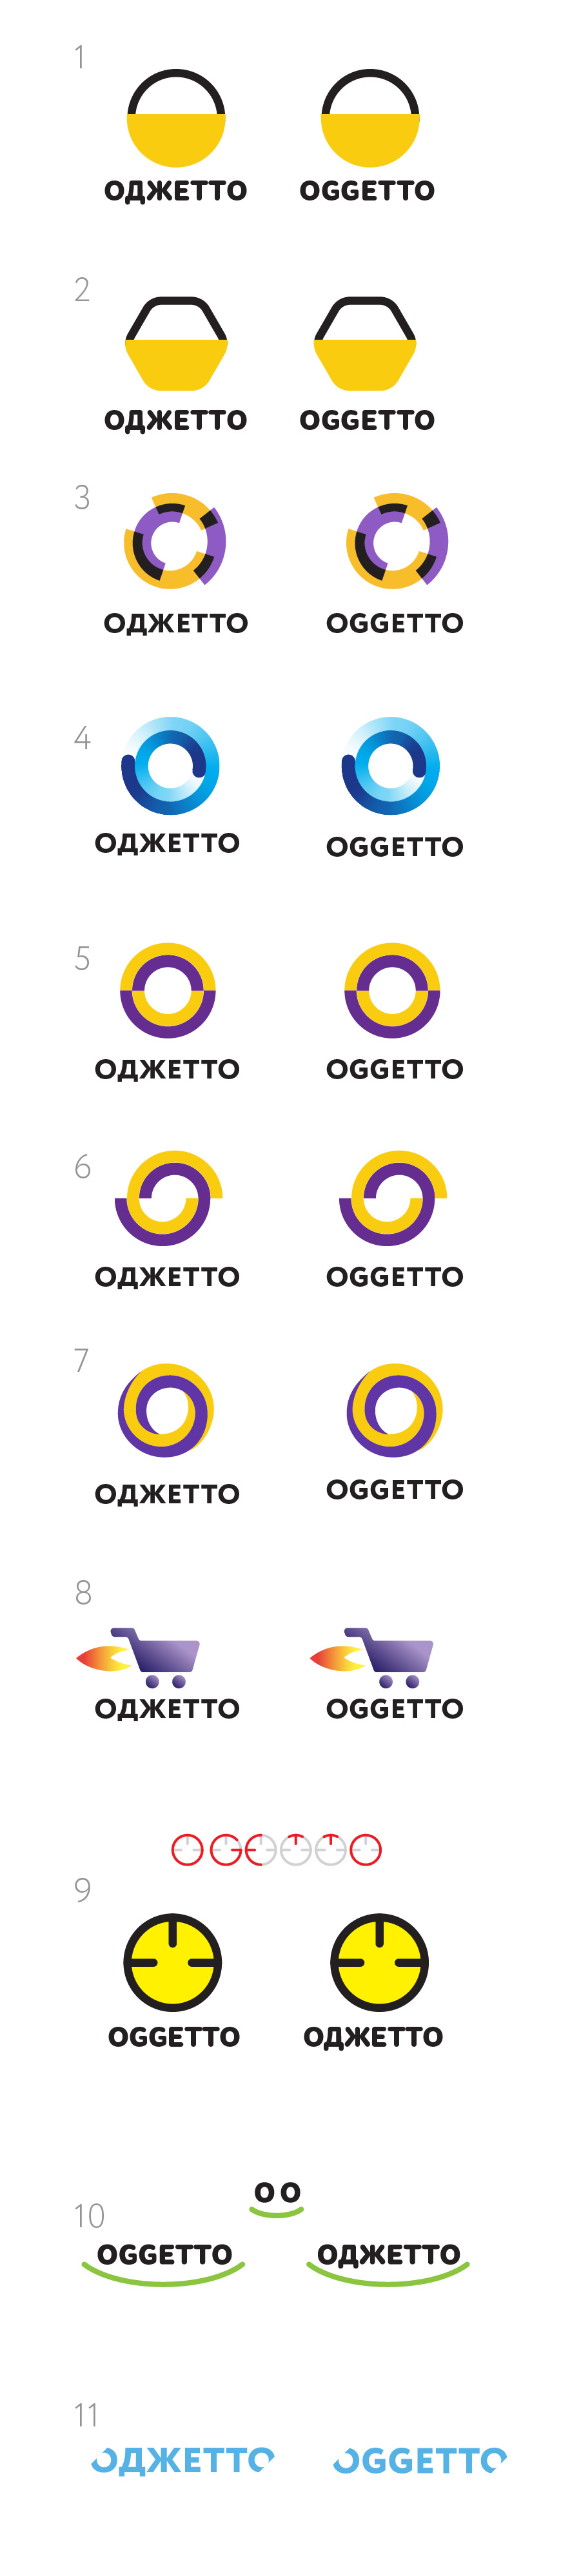 ogetto process 04